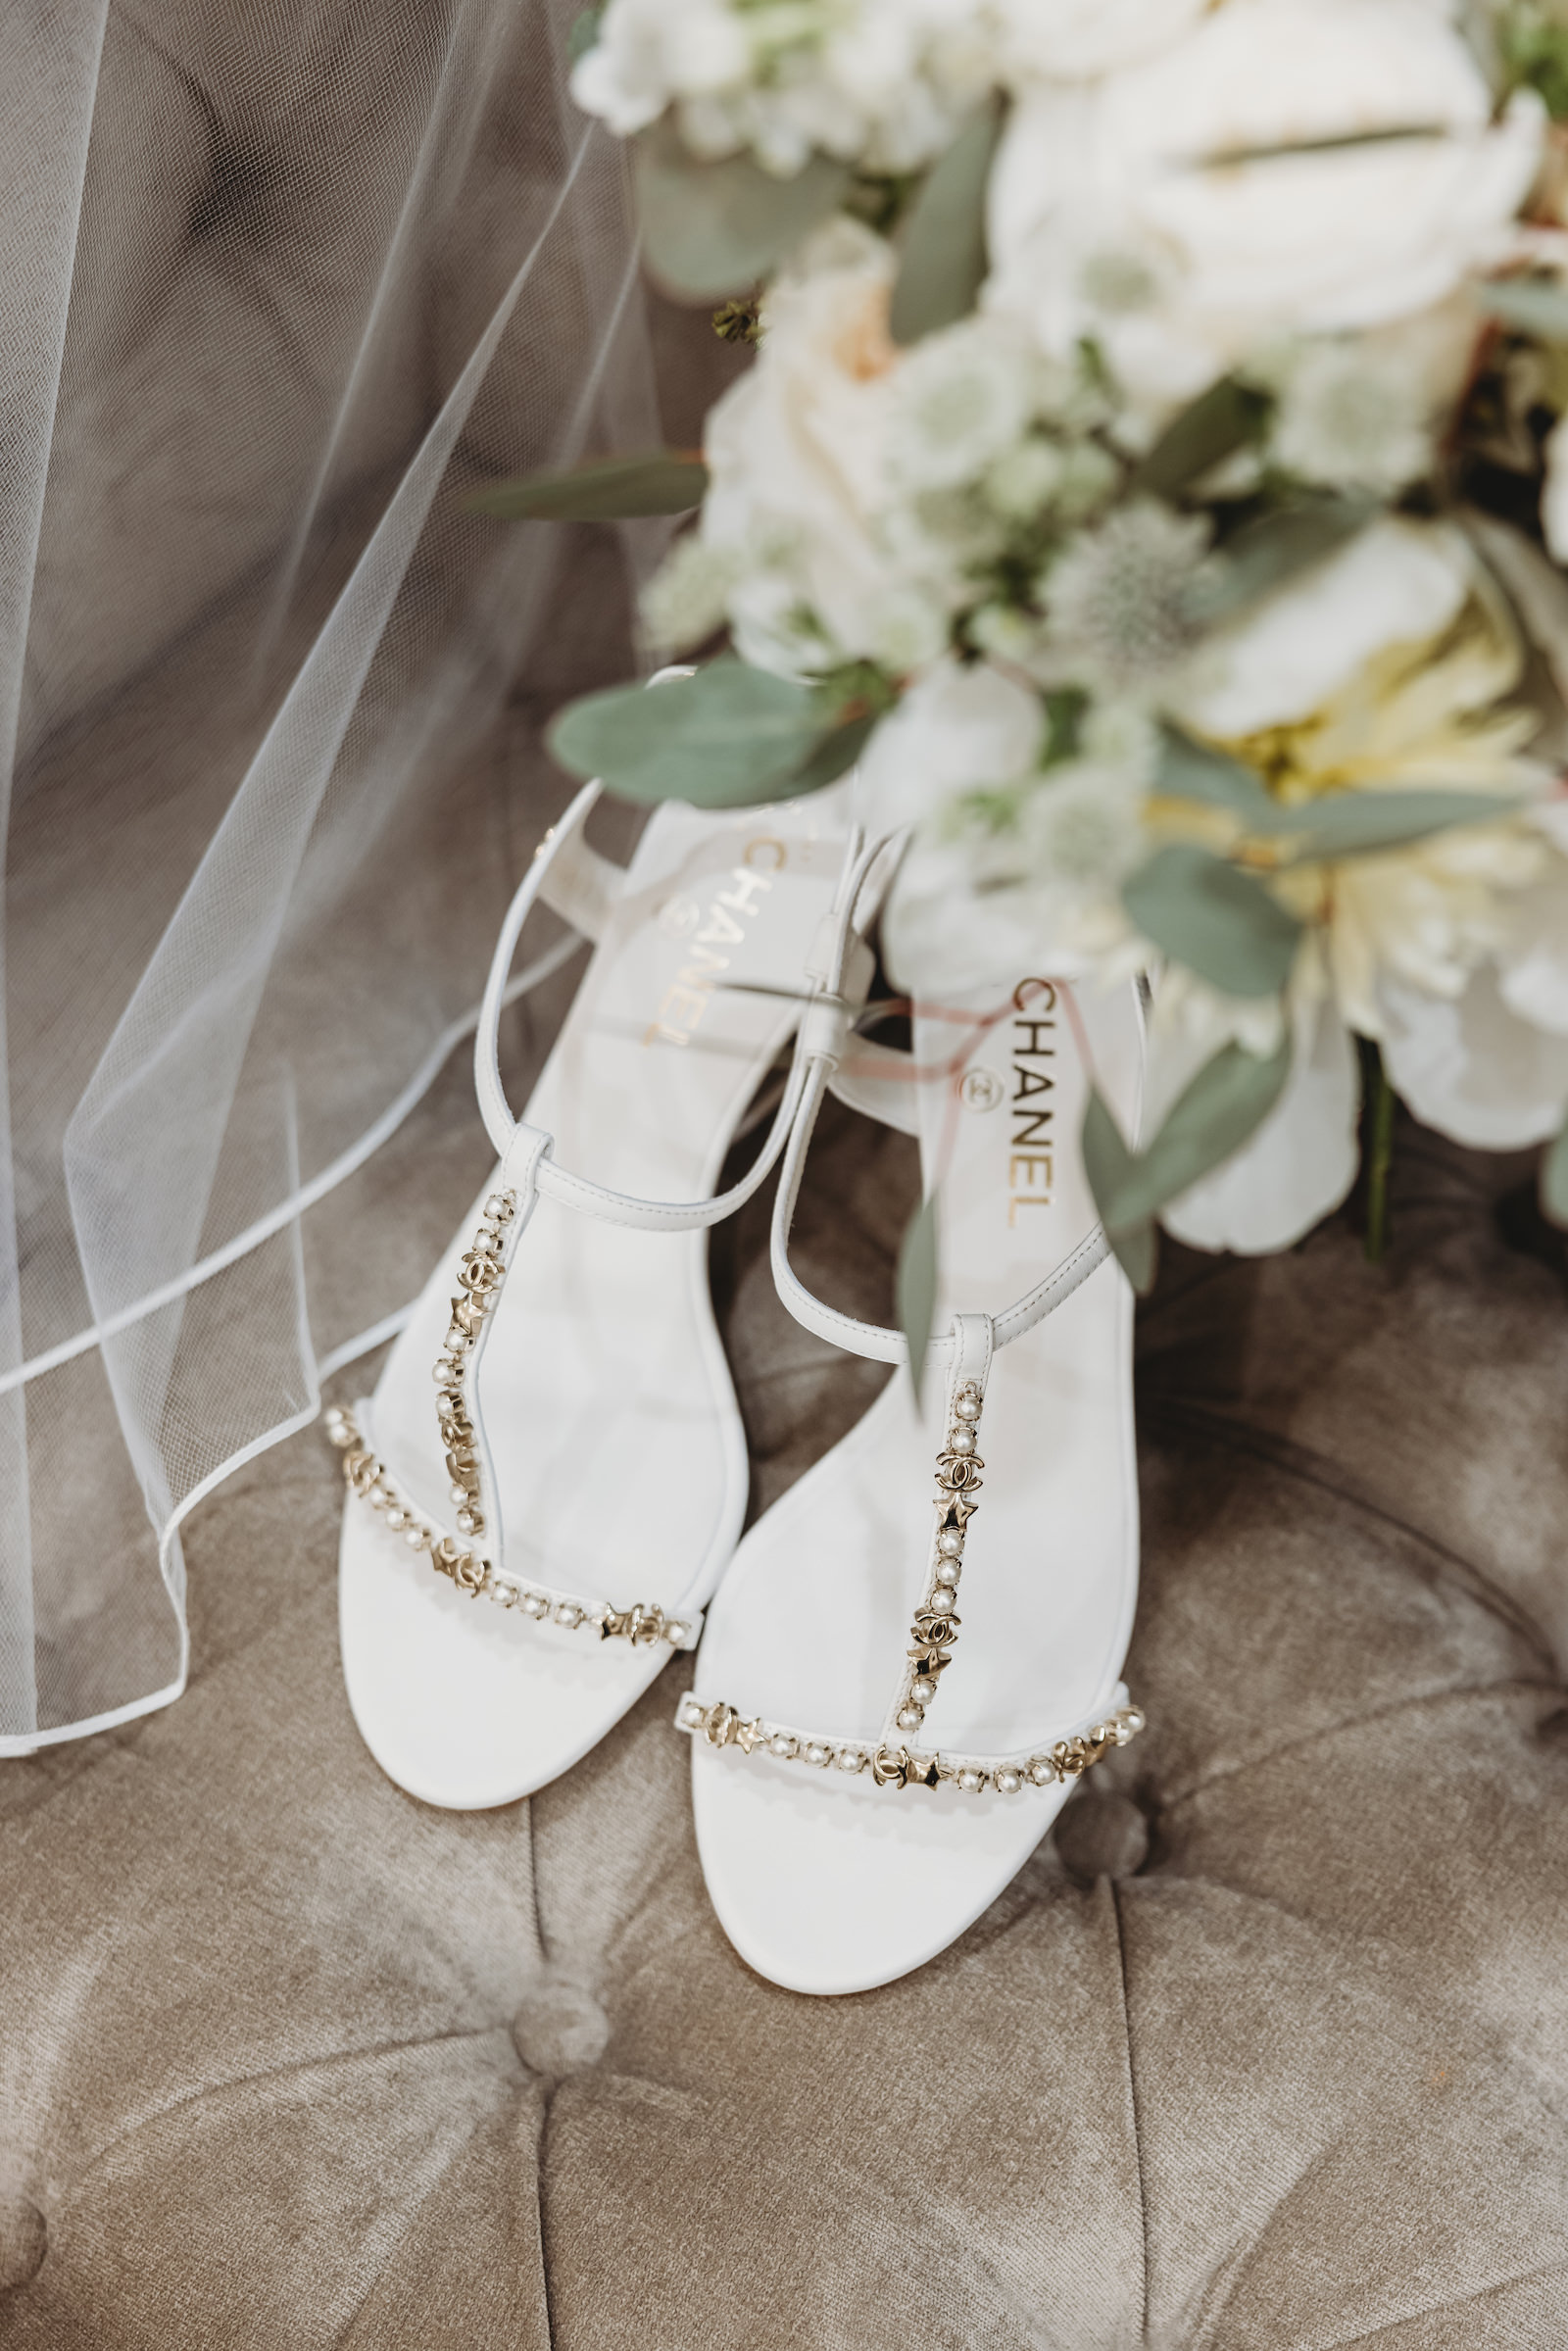 Chanel White and Pearl Strap Wedding Sandal Shoes